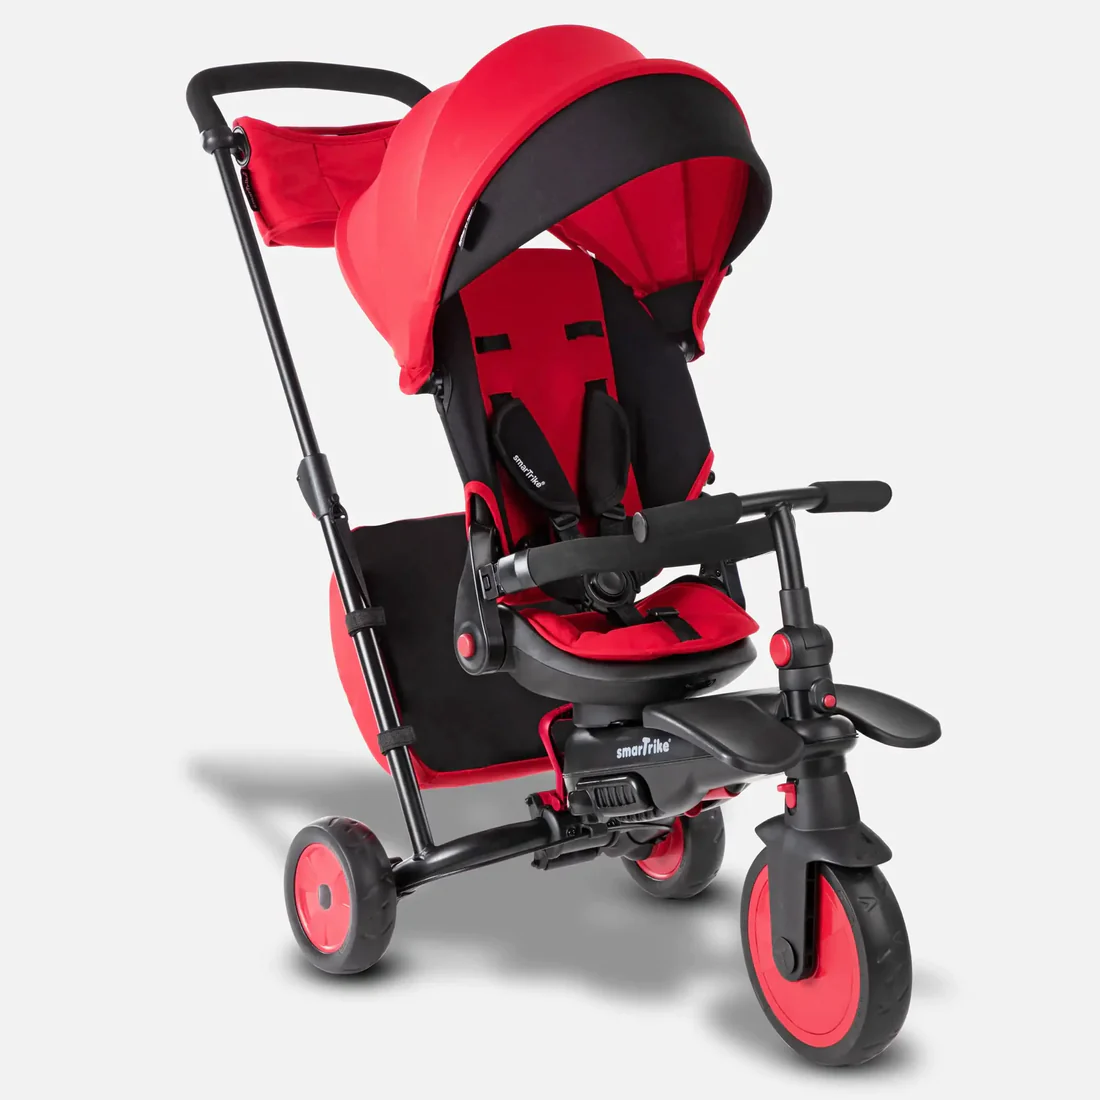 A red and black stroller with wheels